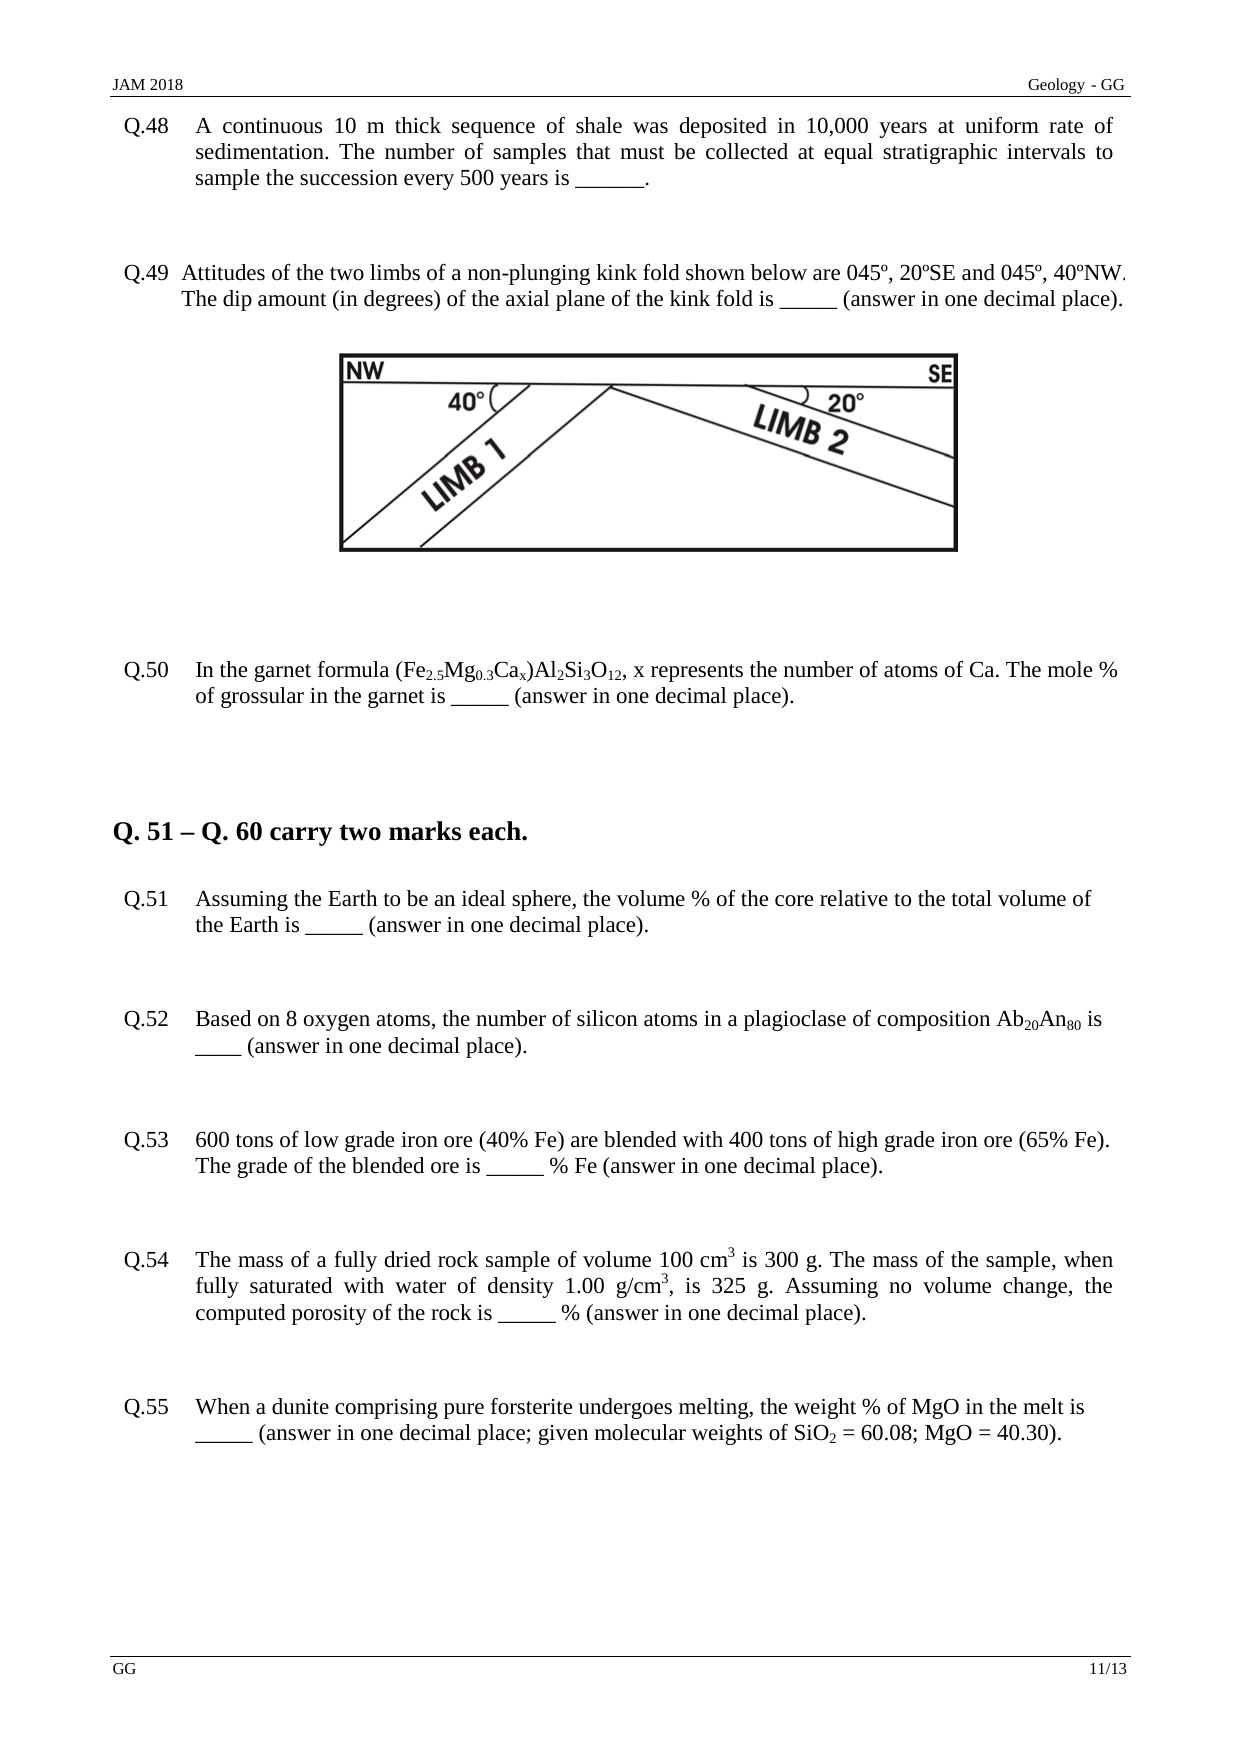 JAM 2018: GG Question Paper - Page 11